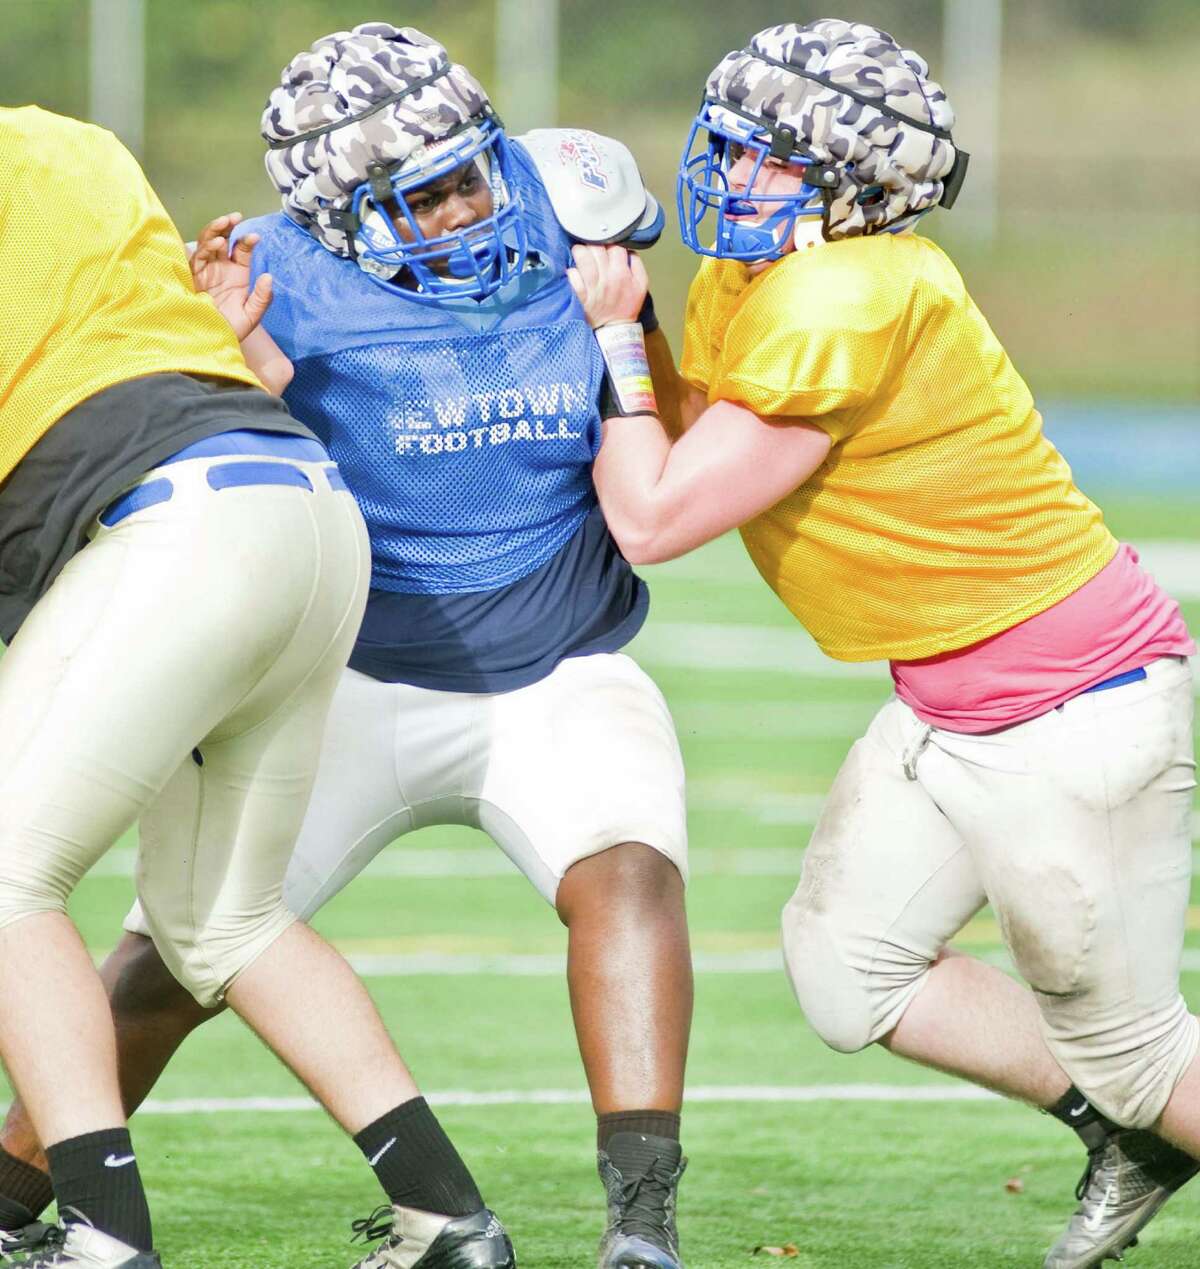 Branden Jackson and Kevin Conte make contact at the line during a Newtown High School football practice. Wednesday, Oct. 15, 2014